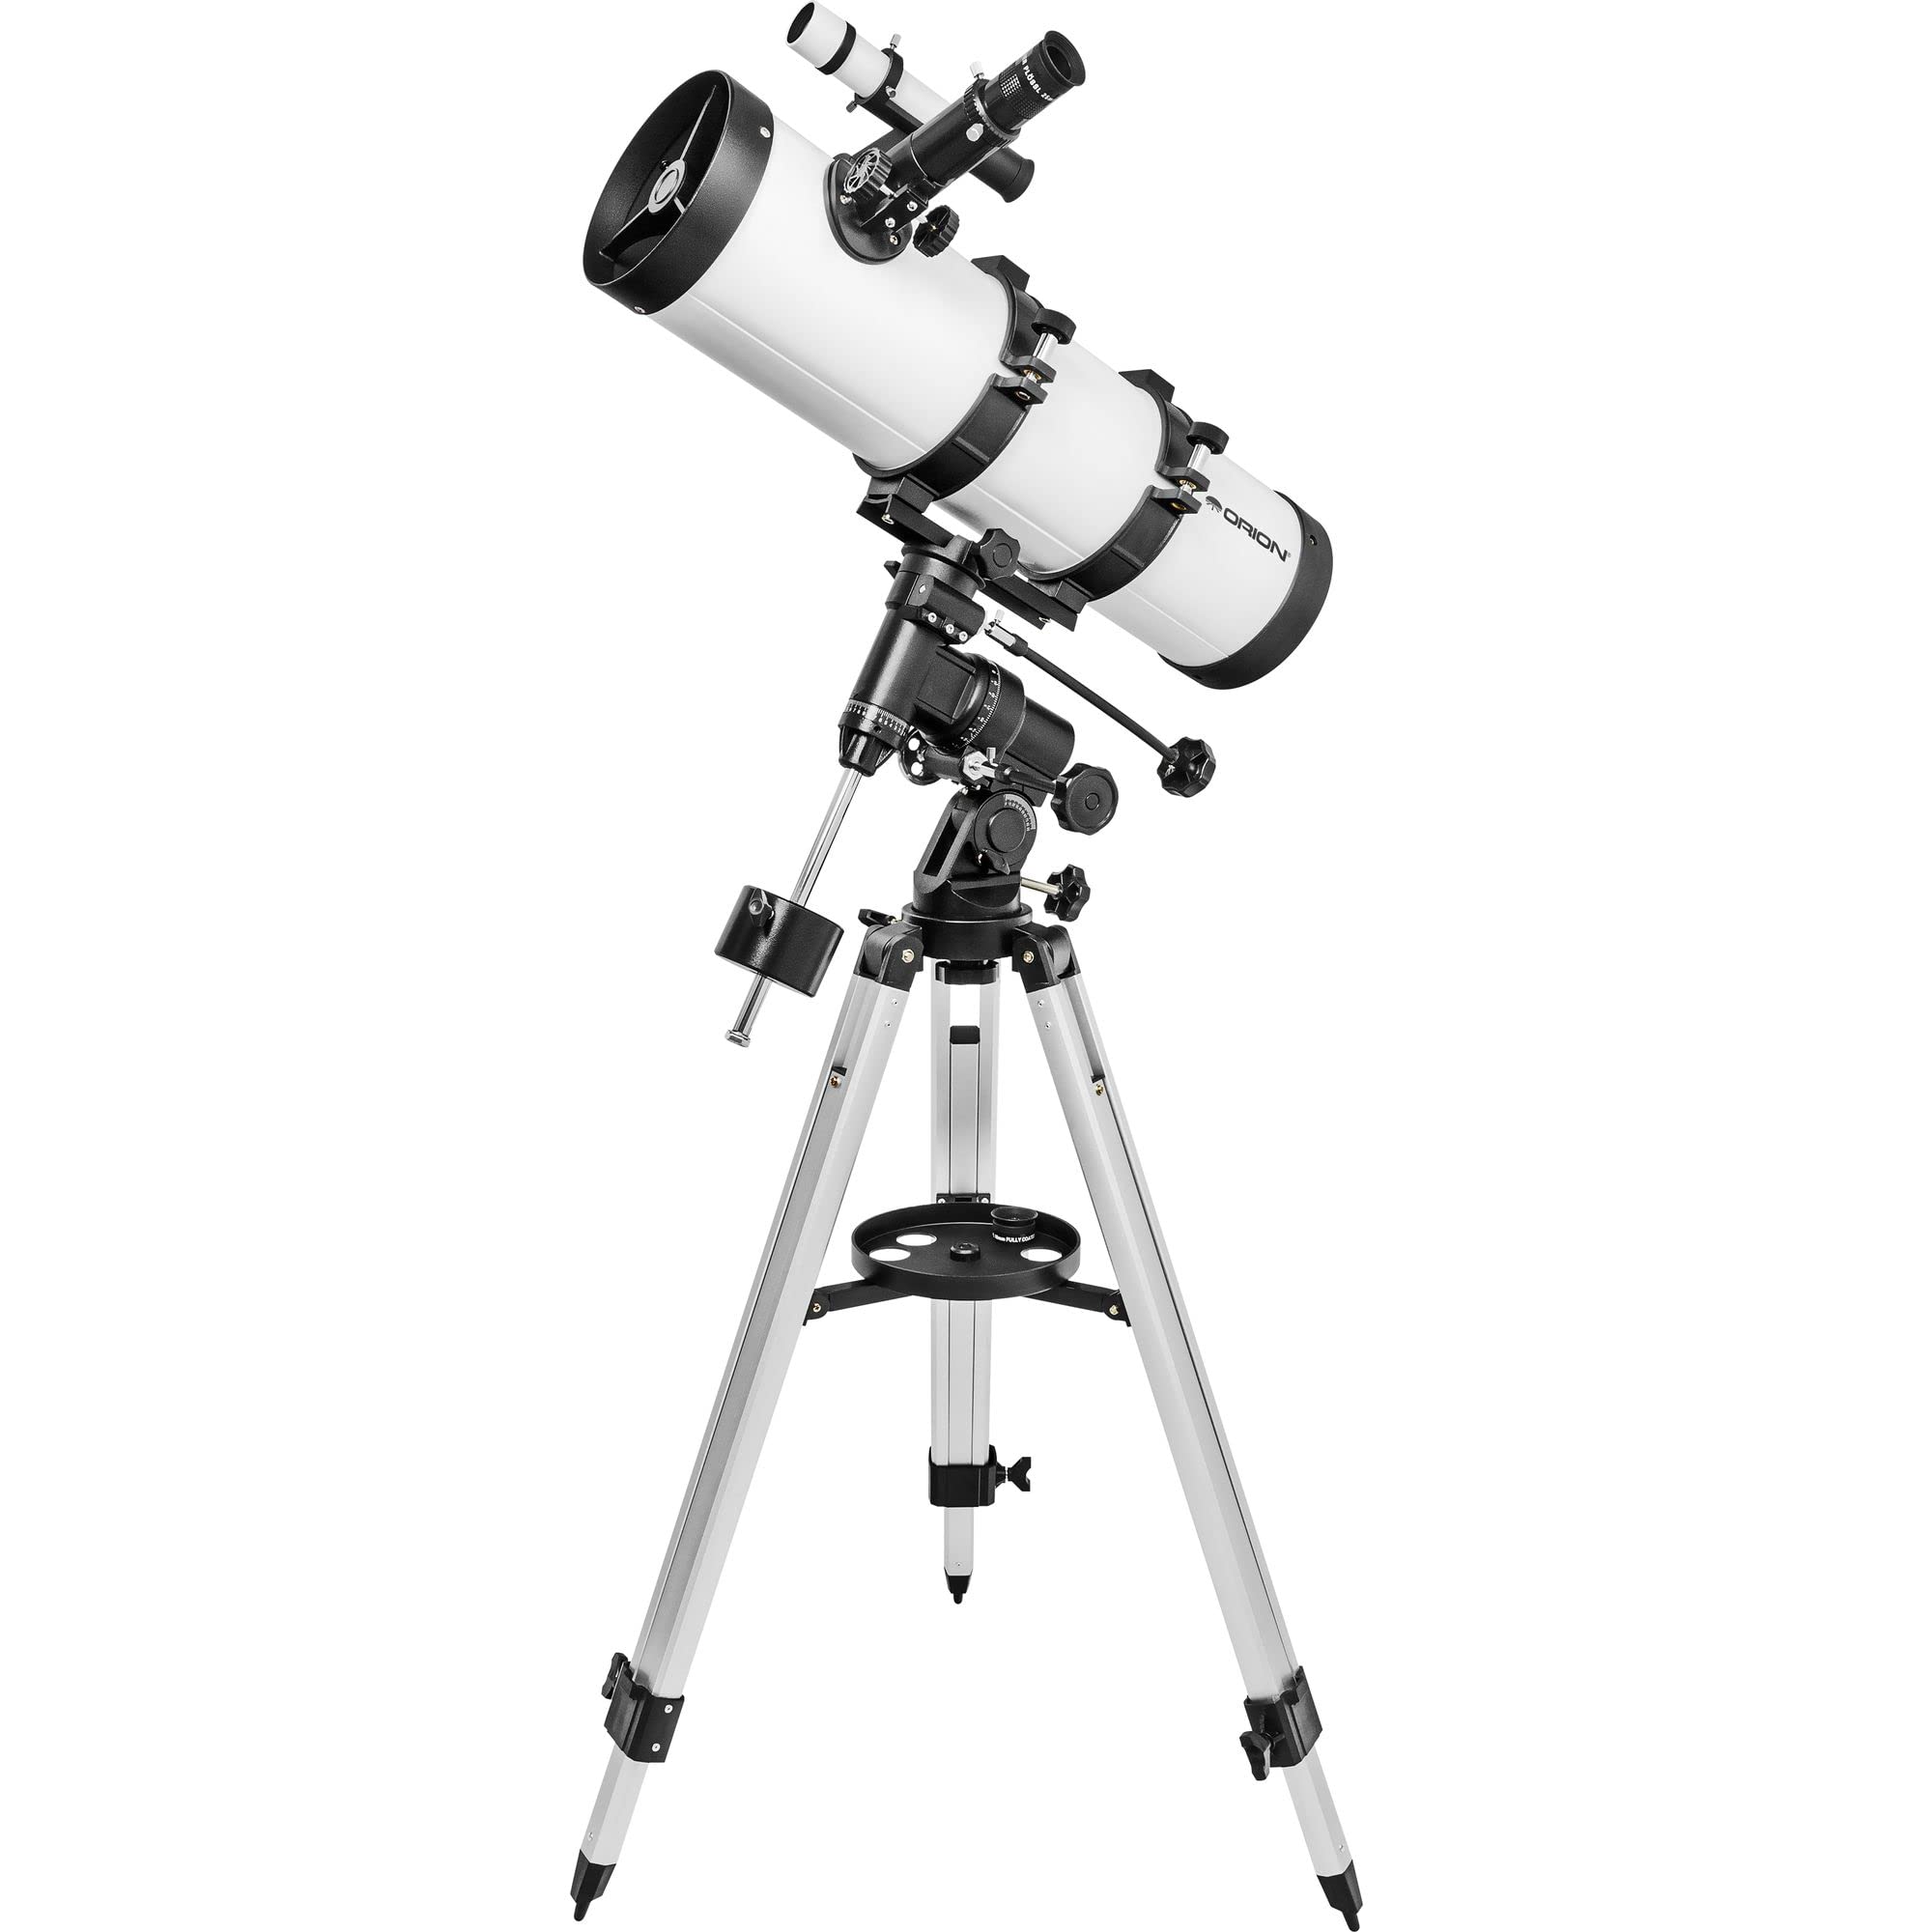 Orion Observer 114mm Equatorial Reflector Telescope for Adults & Families - Quality Telescope for Astronomy Beginners to View Moon, Planets & Stars